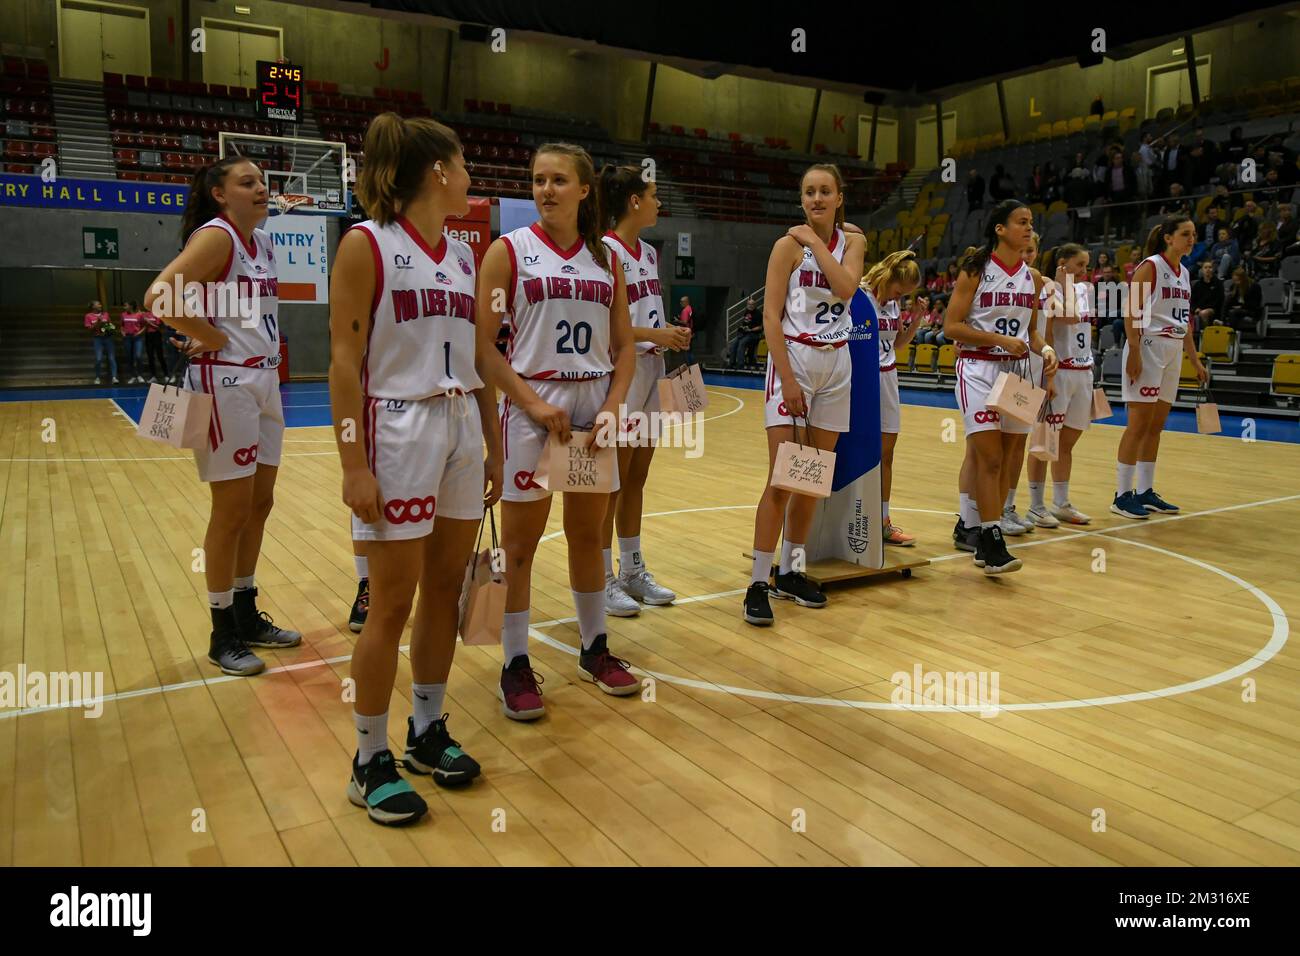 VOO Liege Panthers players pictured before a basketball match between VOO Liege Panthers and BCF Elfic Fribourg, on the gameday 2, group J of the EuroCup Women, Wednesday 23 October 2019, Liege, Country Hall du Sart Tilman. PHOTO BERNARD GILLET Stock Photo